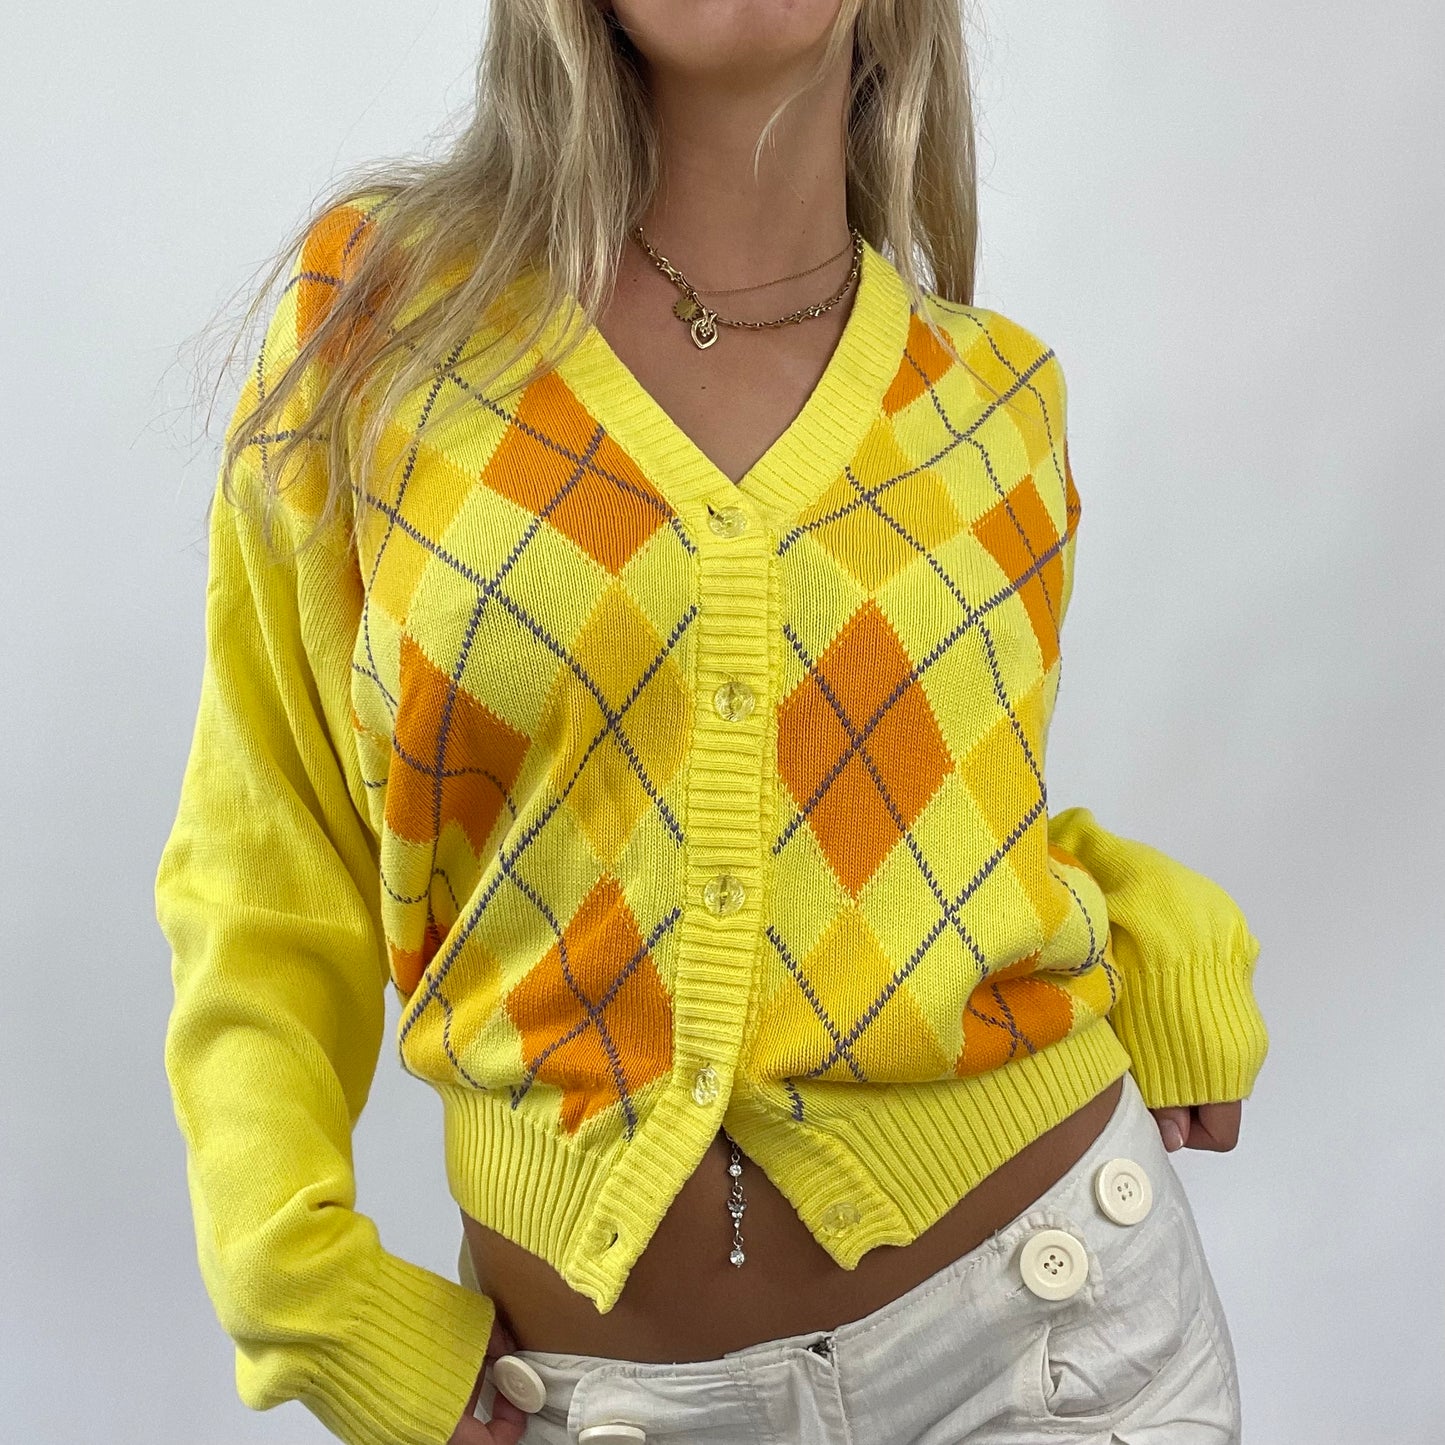 FRESHERS FITS DROP | small yellow argyle button up cardigan